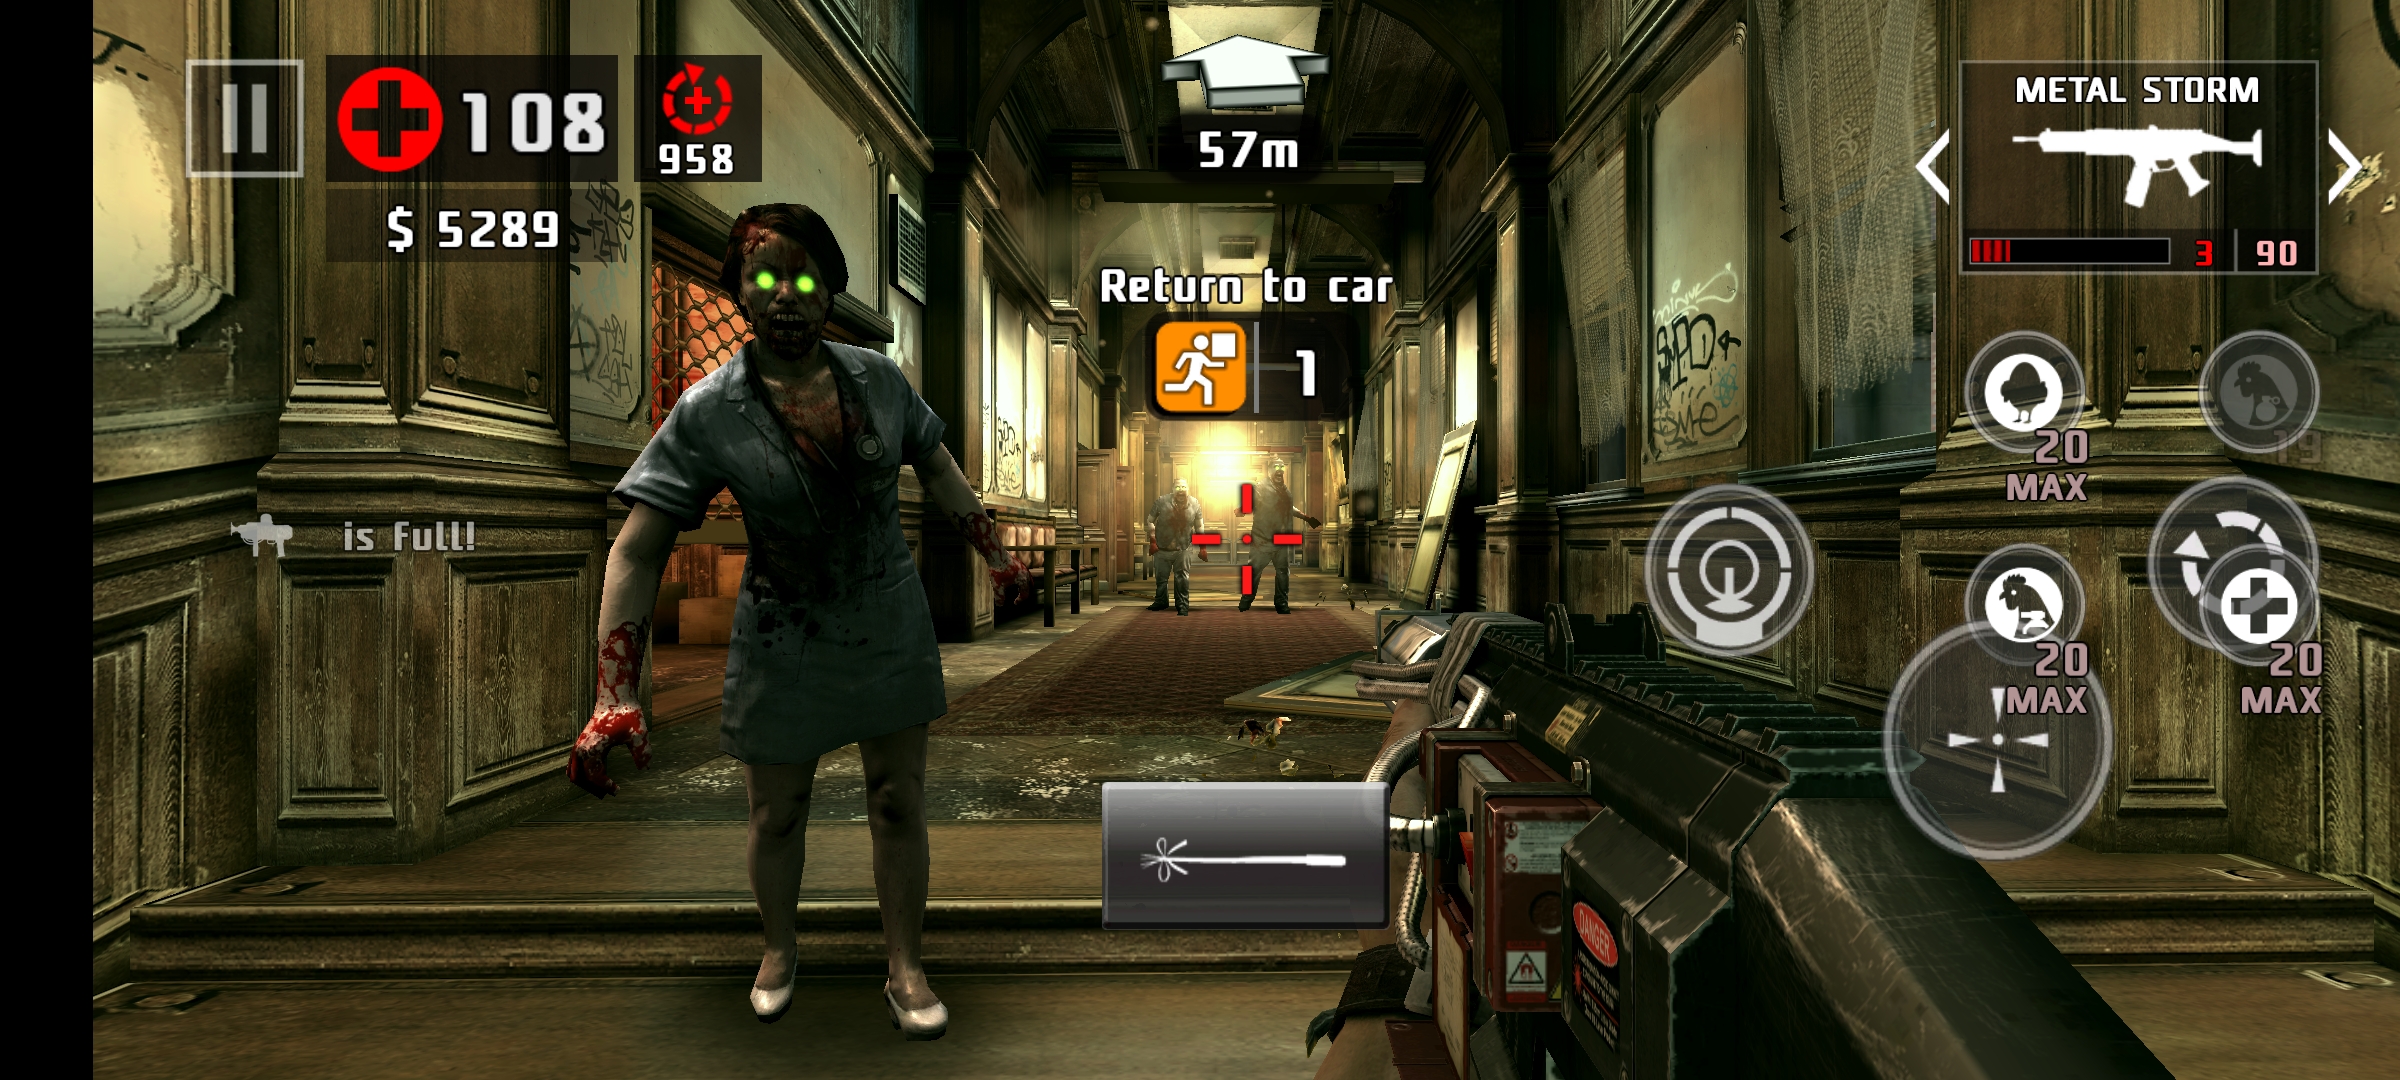 [Game Android] Dead Trigger 2 FPS Zombi Game Offline Mod